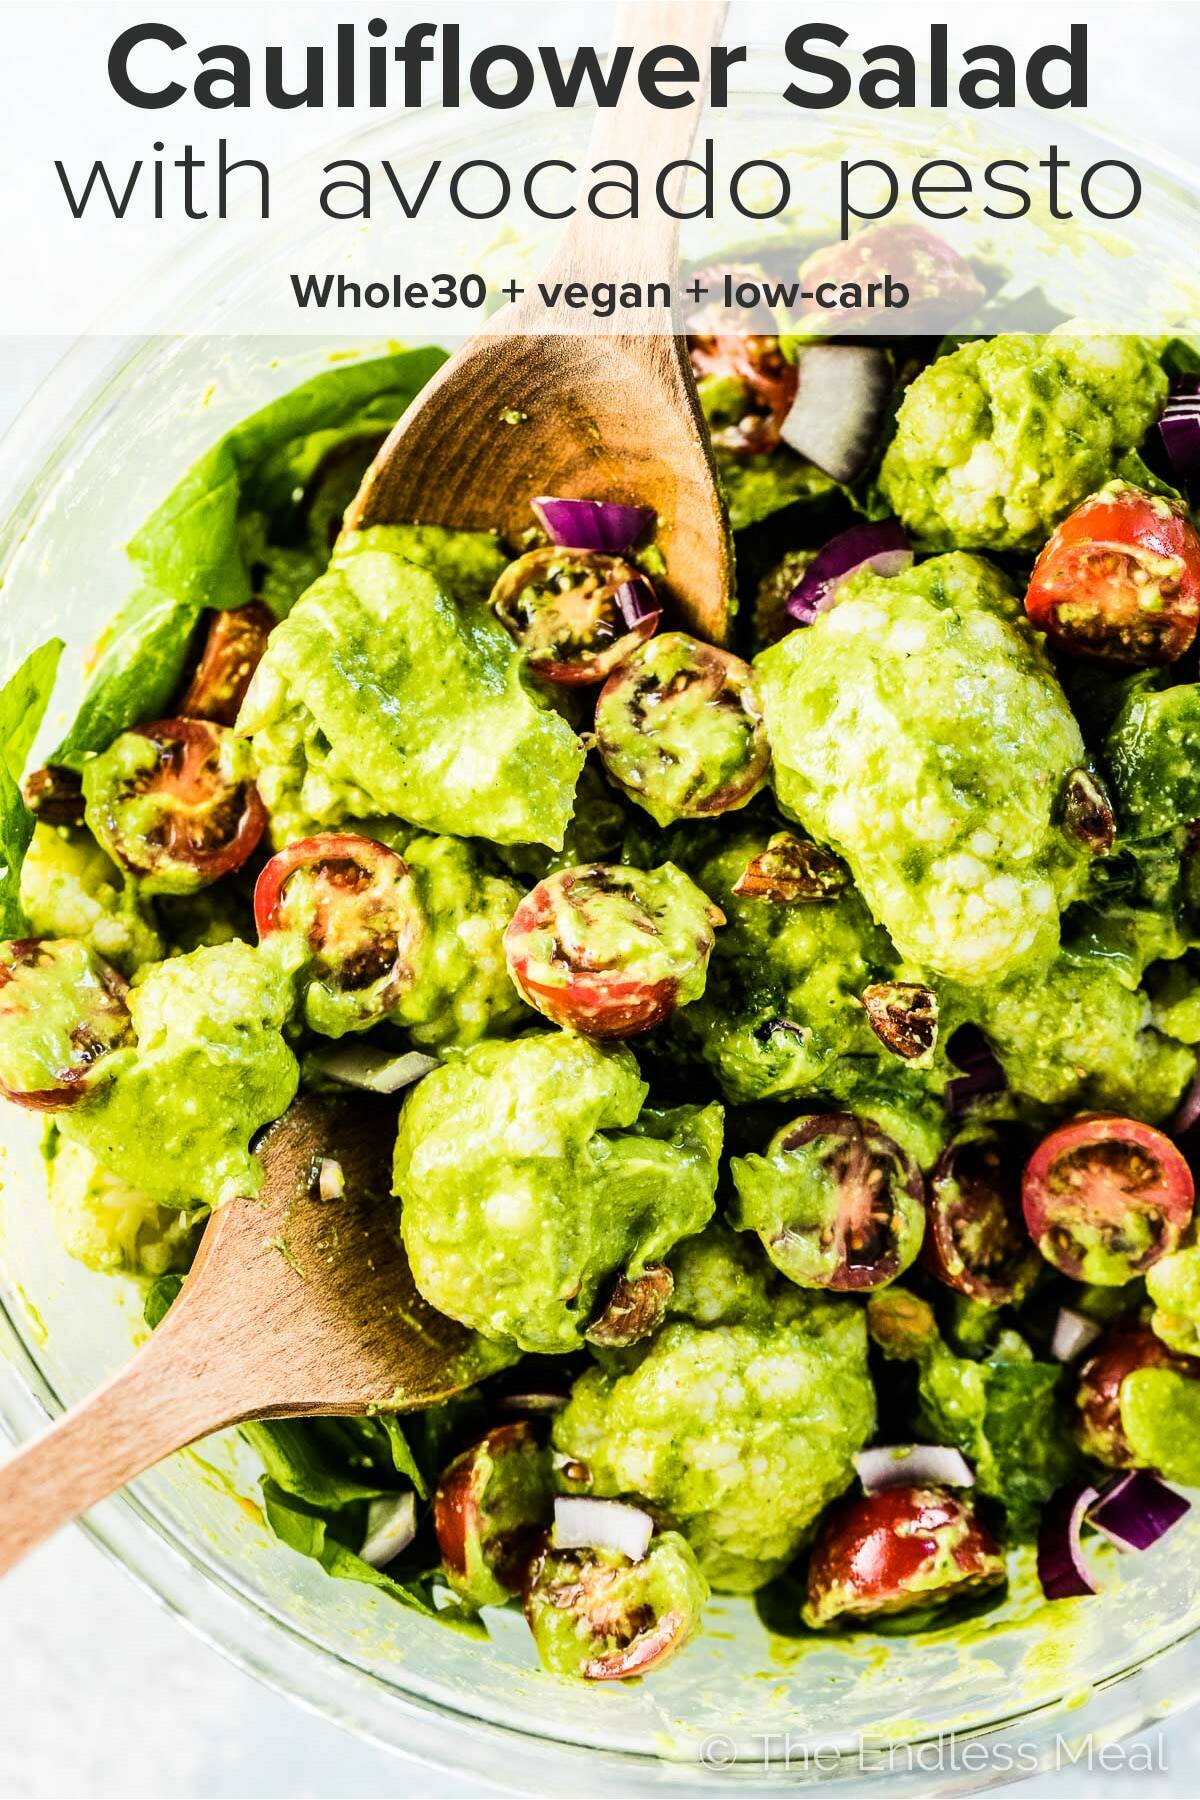 Cauliflower Salad with creamy avocado pesto dressing and the title on top of the picture.